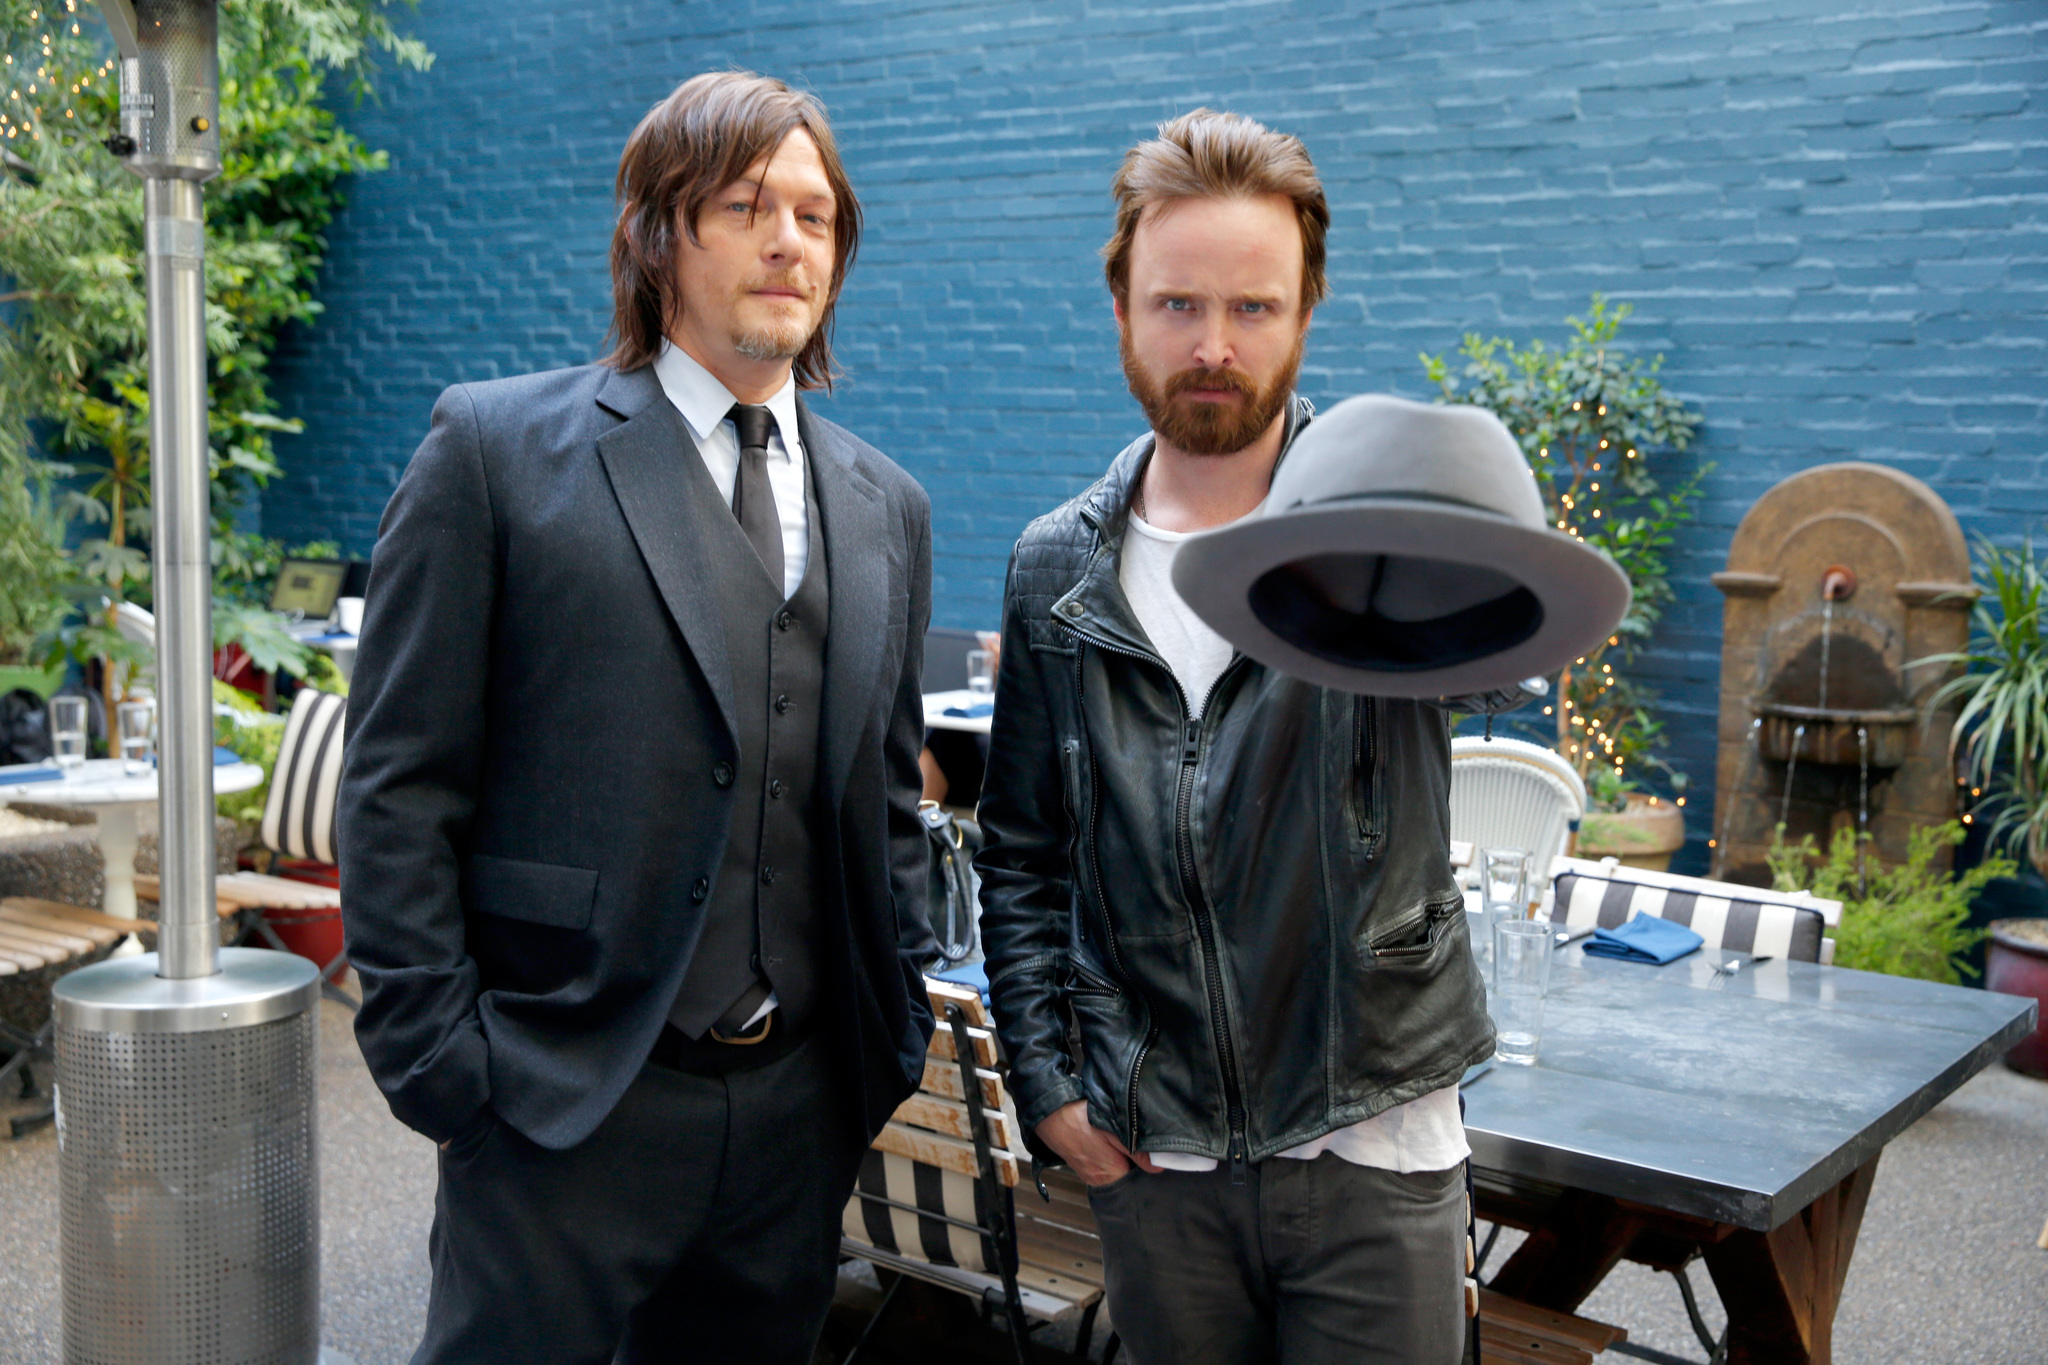 Actors Norman Reedus (L) and Aaron Paul attend the Variety Studio powered by Samsung Galaxy at Palihouse on May 29, 2014 in West Hollywood, California.